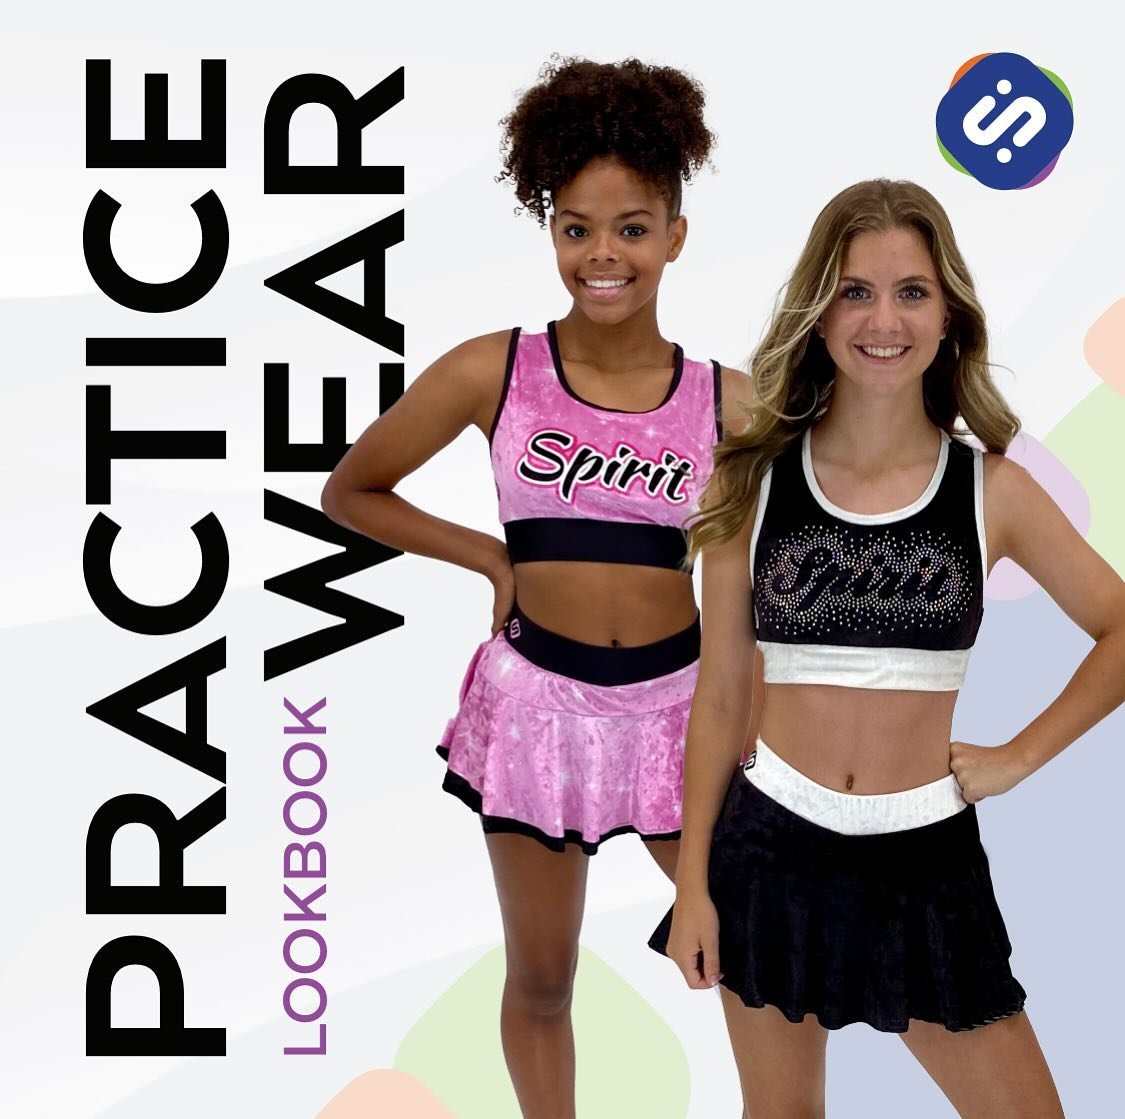 Check Out Our Practice Wear Lookbook! 
https://www.innovativespiritwear.com/practice-wear

Choose to be INNOVATIVE this season. Send us a message at http://innovativespiritwear.com/contact for more information and to get your Design Sketches created.